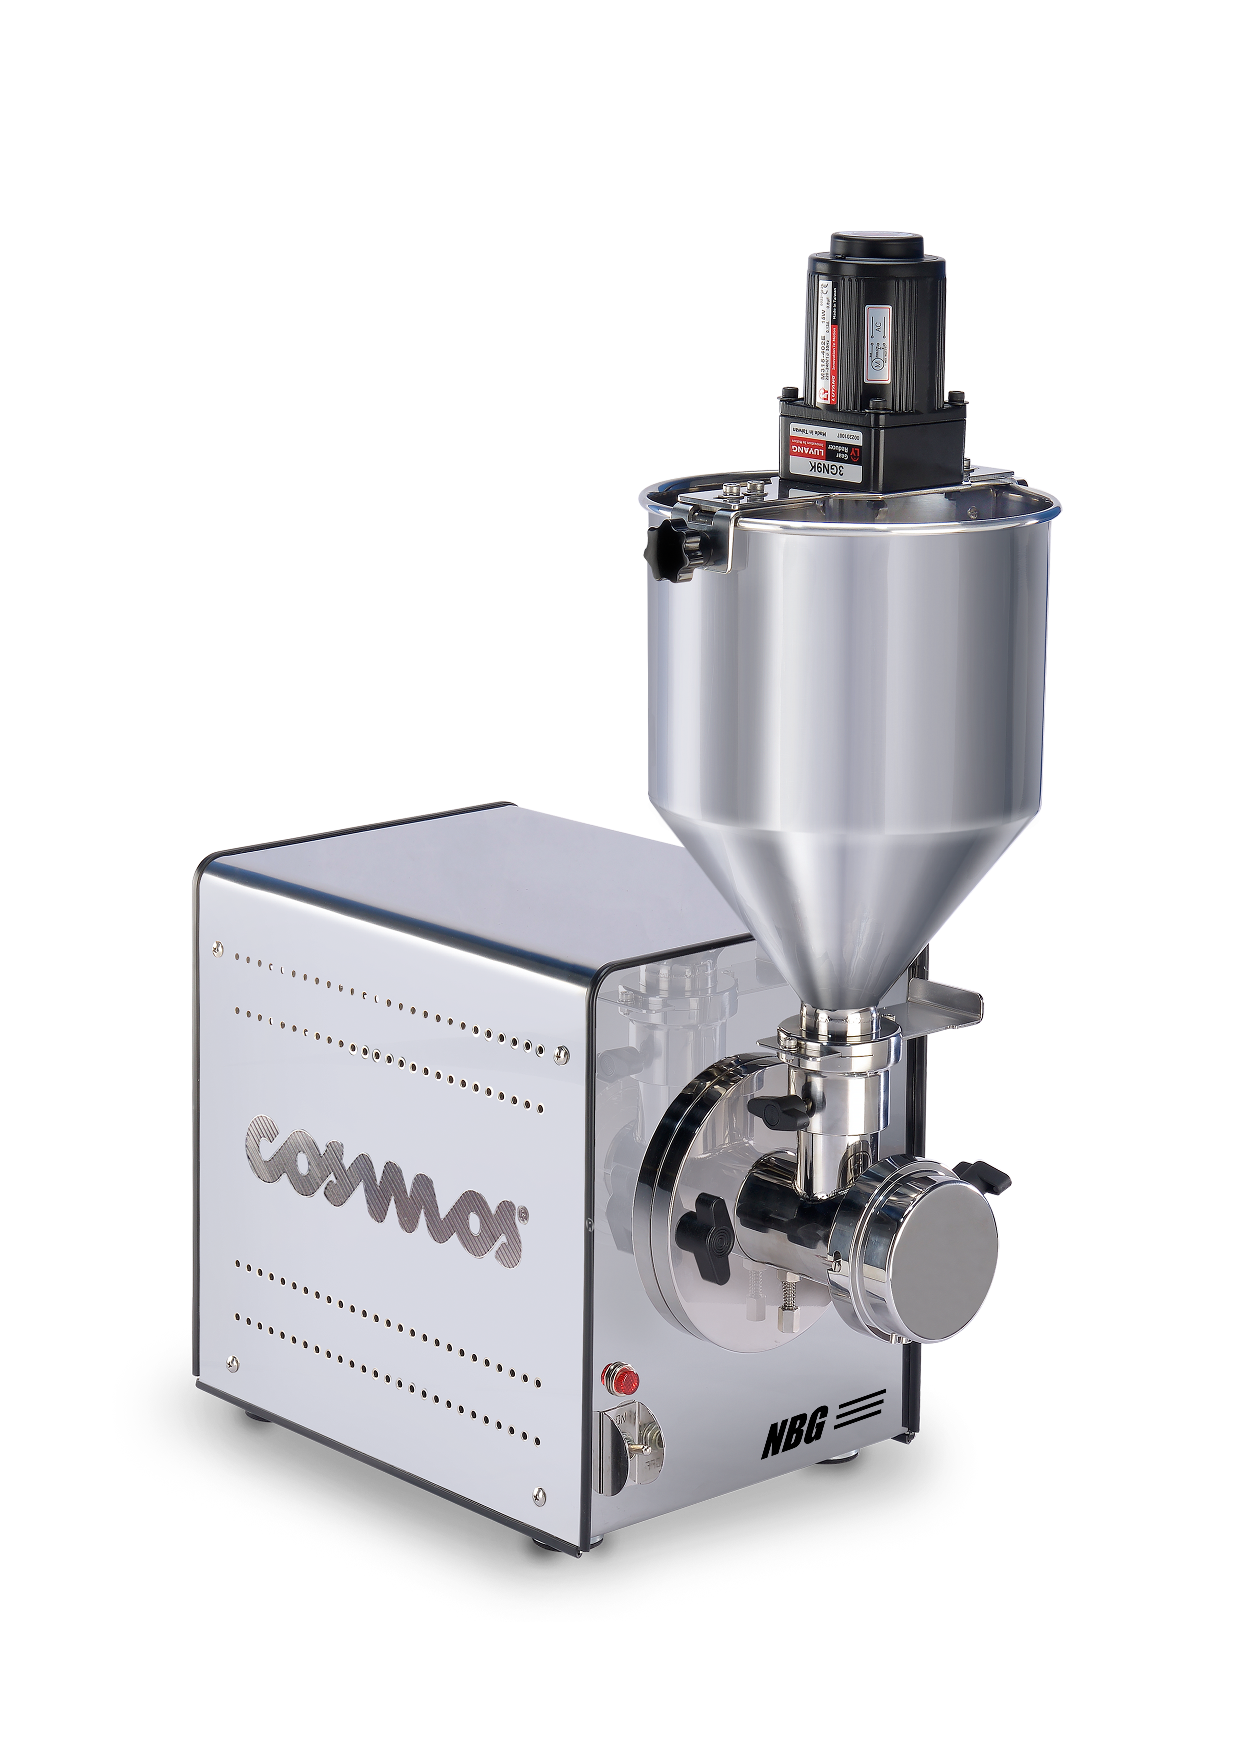 EssEmm Corporation launches Cosmos Nut Butter Grinder